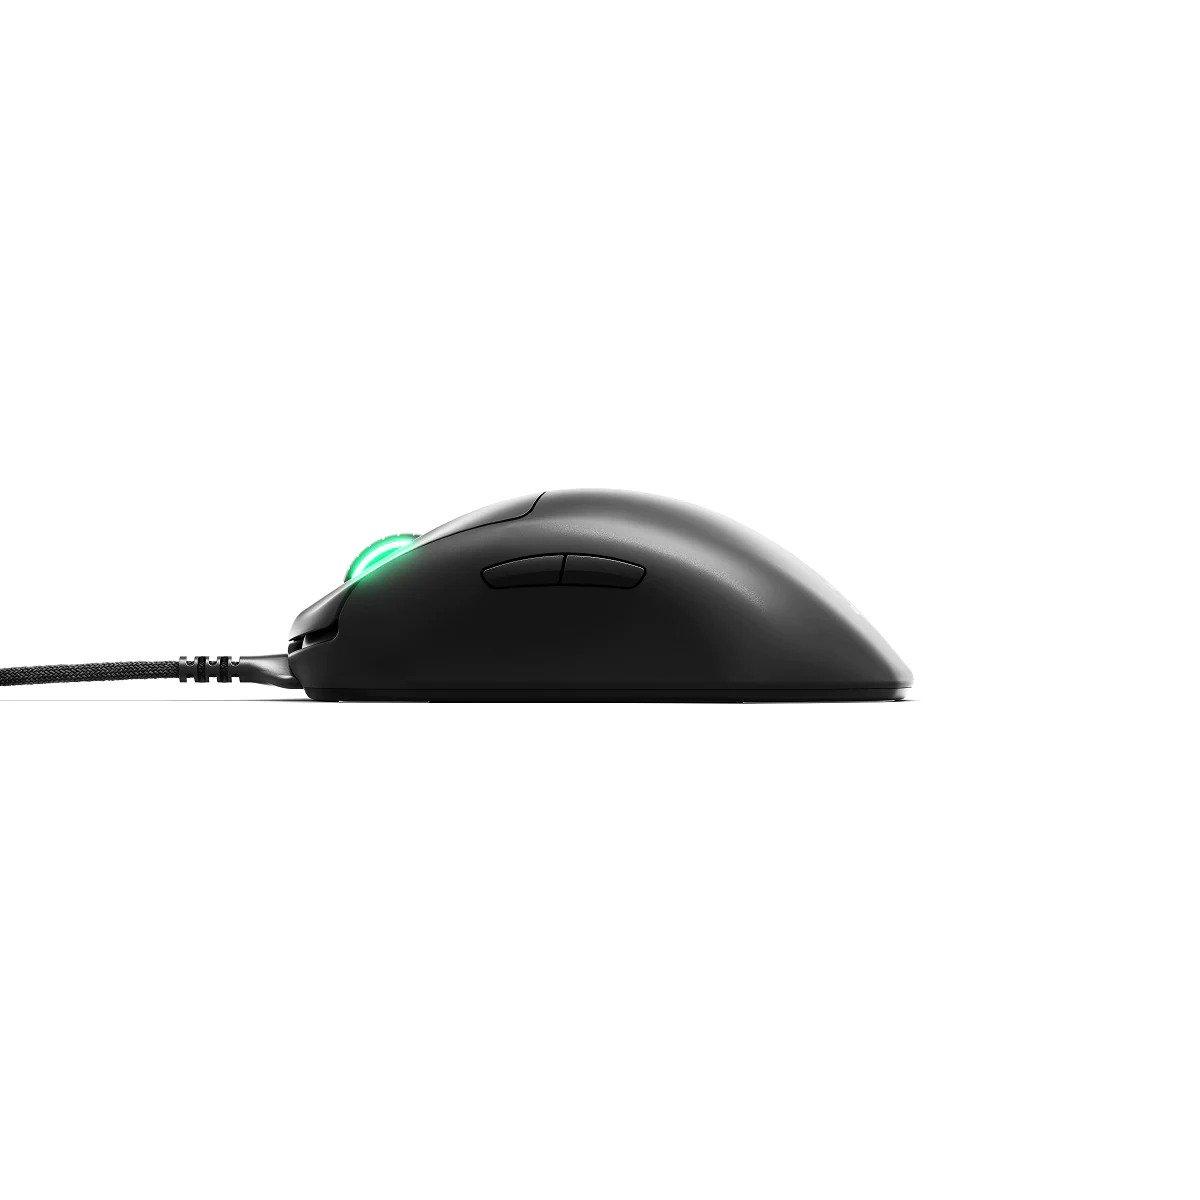 STEELSERIES PRIME MOUSE